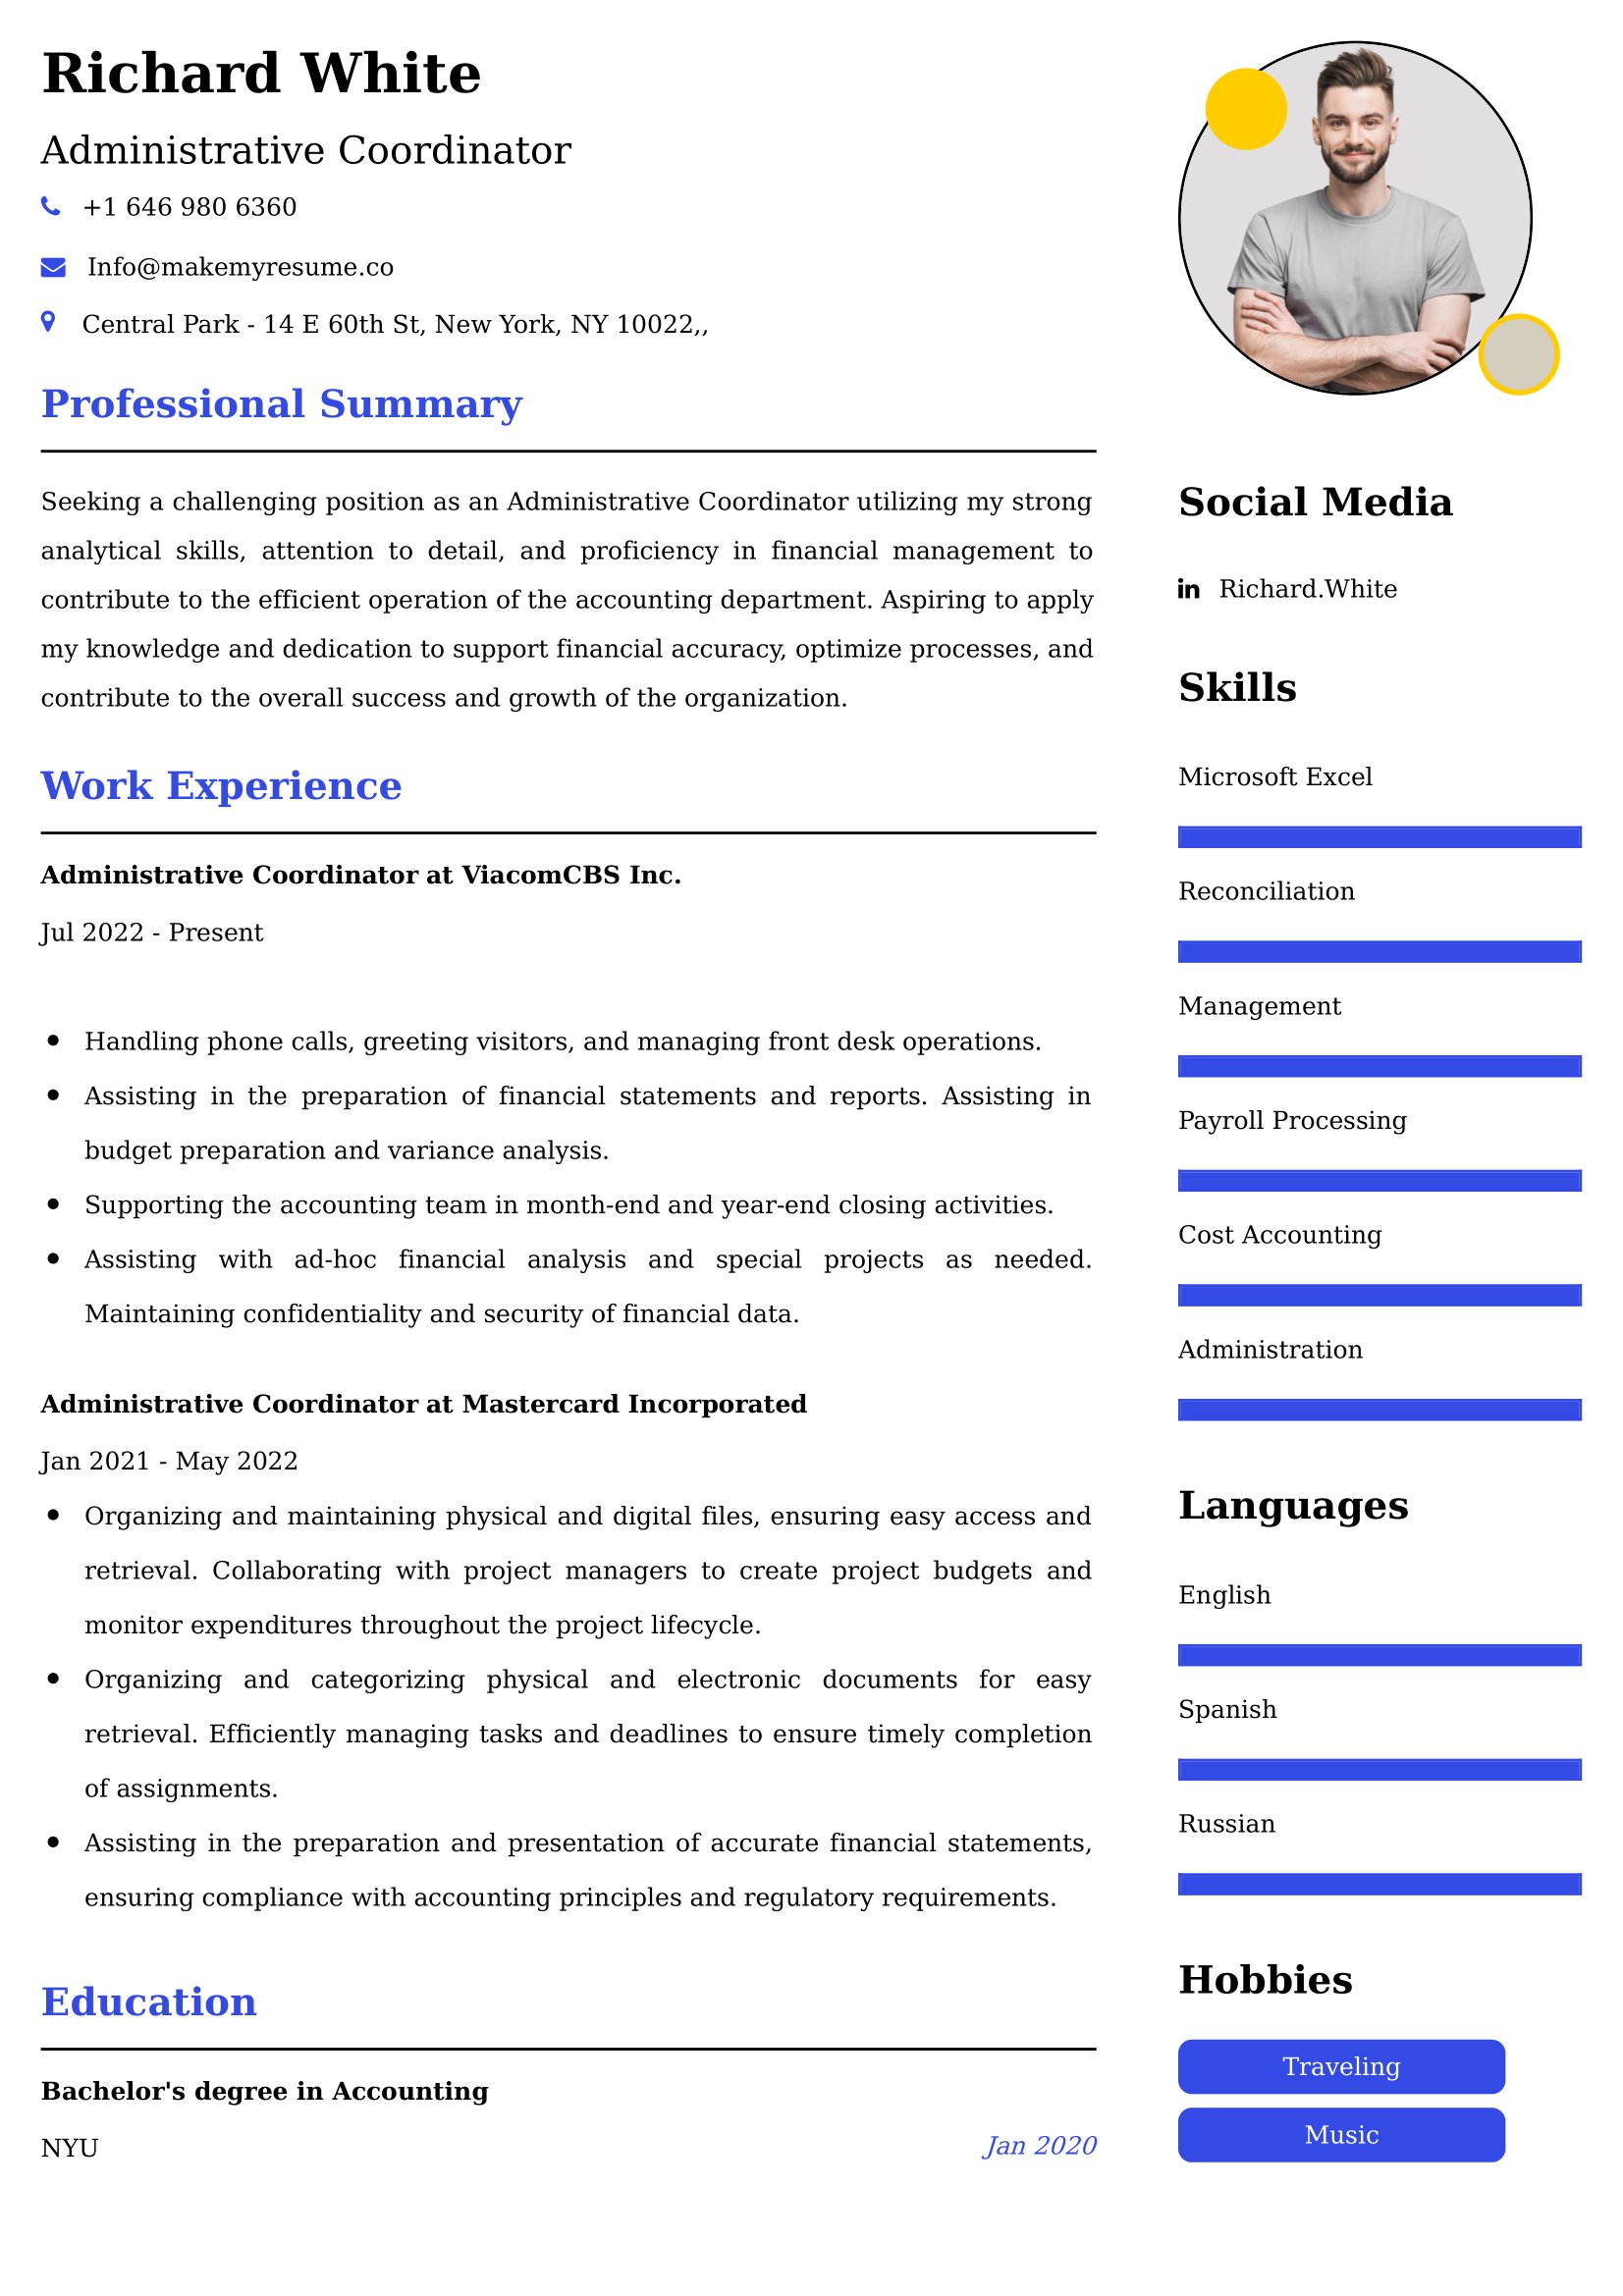 Administrative Coordinator Resume Examples - Canadian Format and Tips